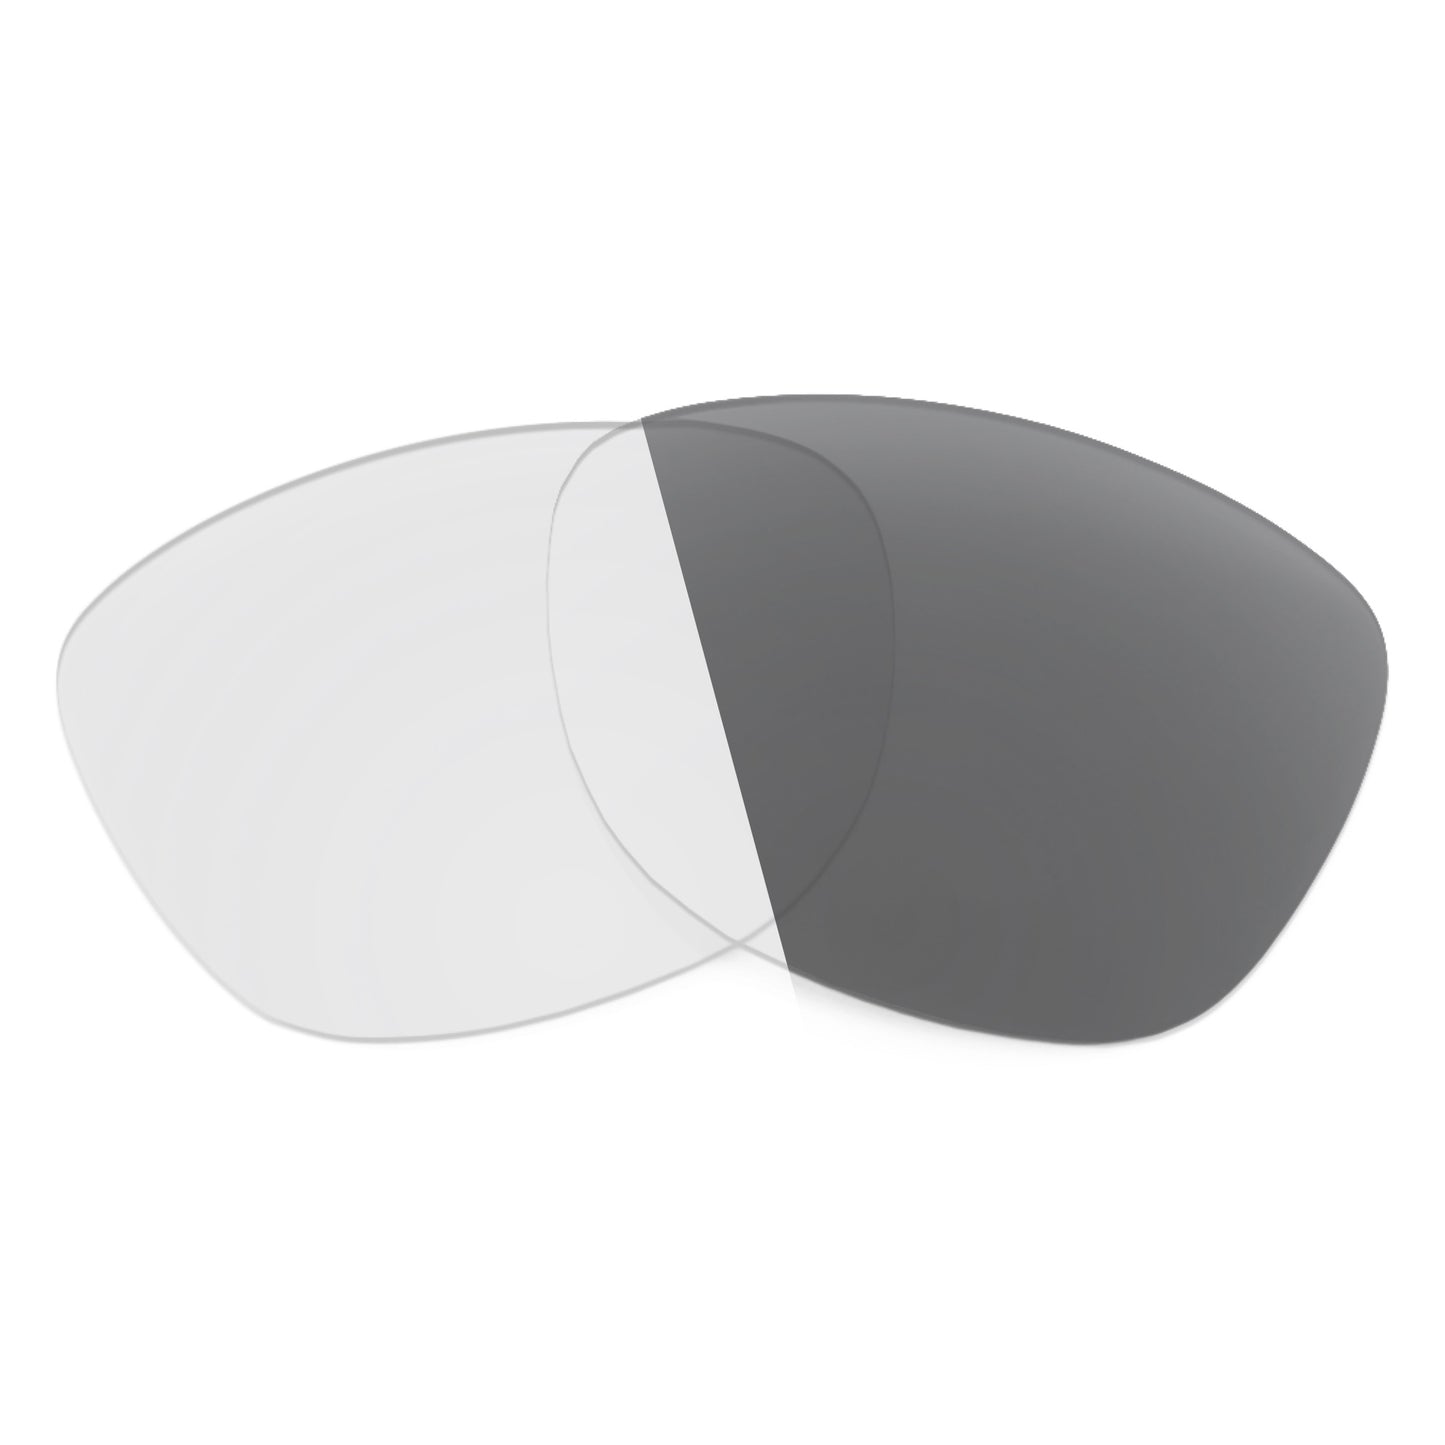 Revant replacement lenses for Ray-Ban RB4215 57mm Non-Polarized Adapt Gray Photochromic